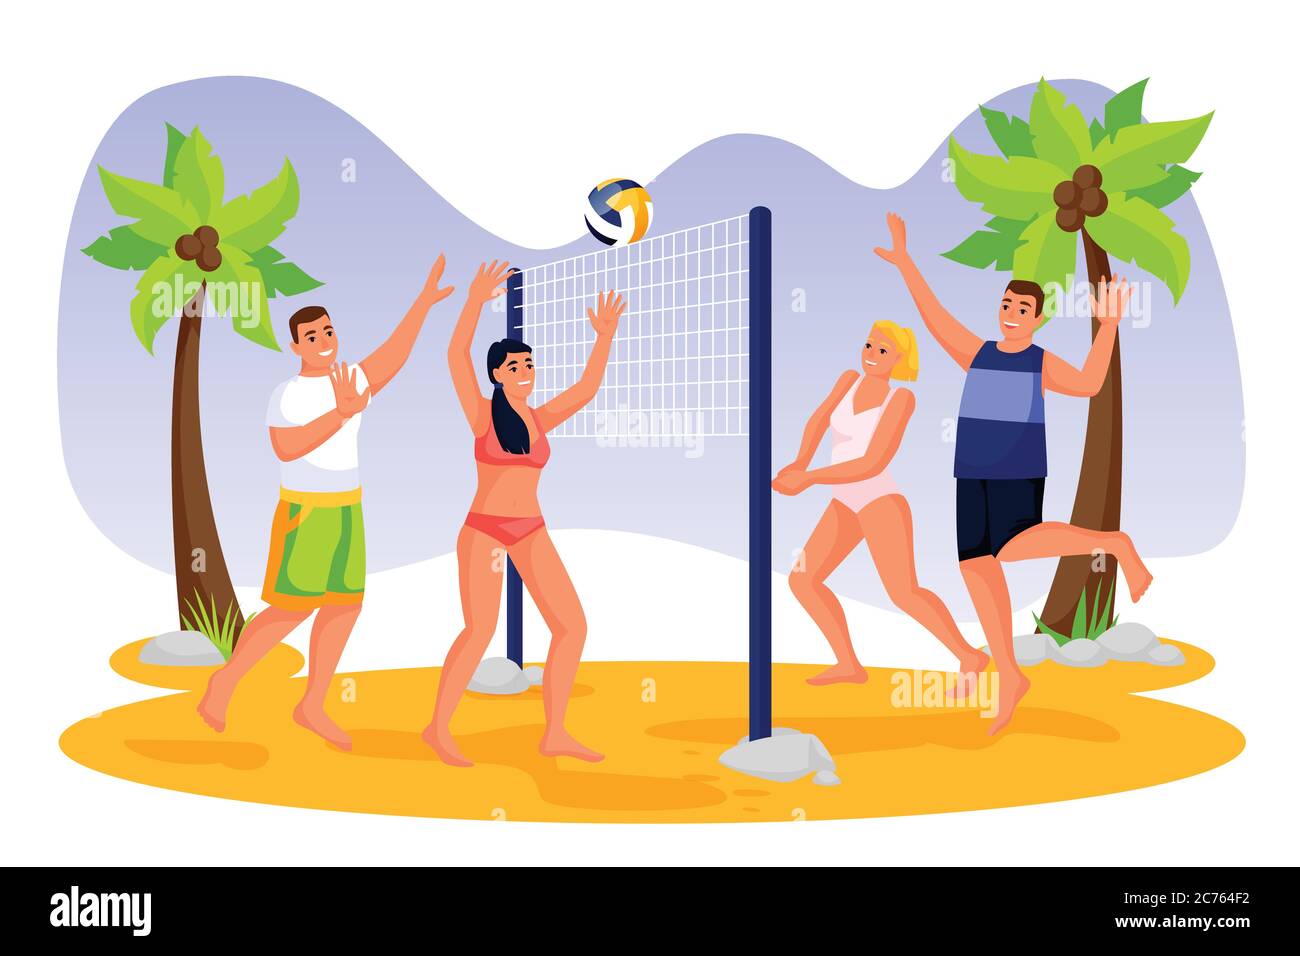 Friends play beach volleyball. Vector flat cartoon people characters illustration. Summer outdoor leisure activities and sport lifestyle. Young men an Stock Vector